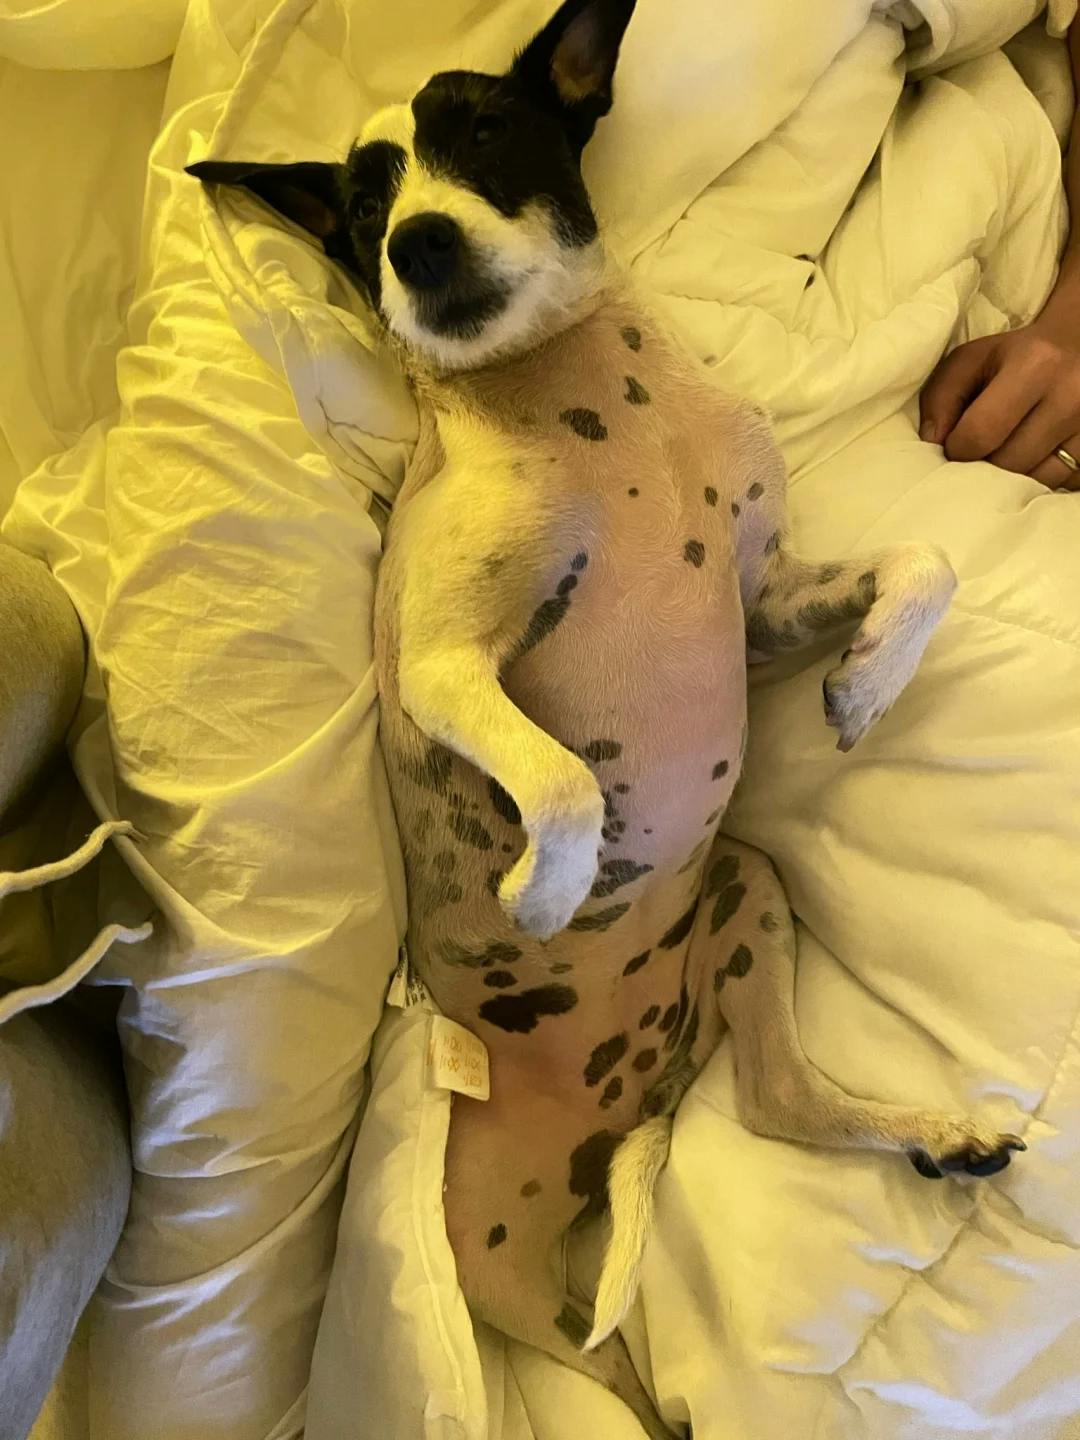 My pup Lila on her belly, not wanting to get out of bed!